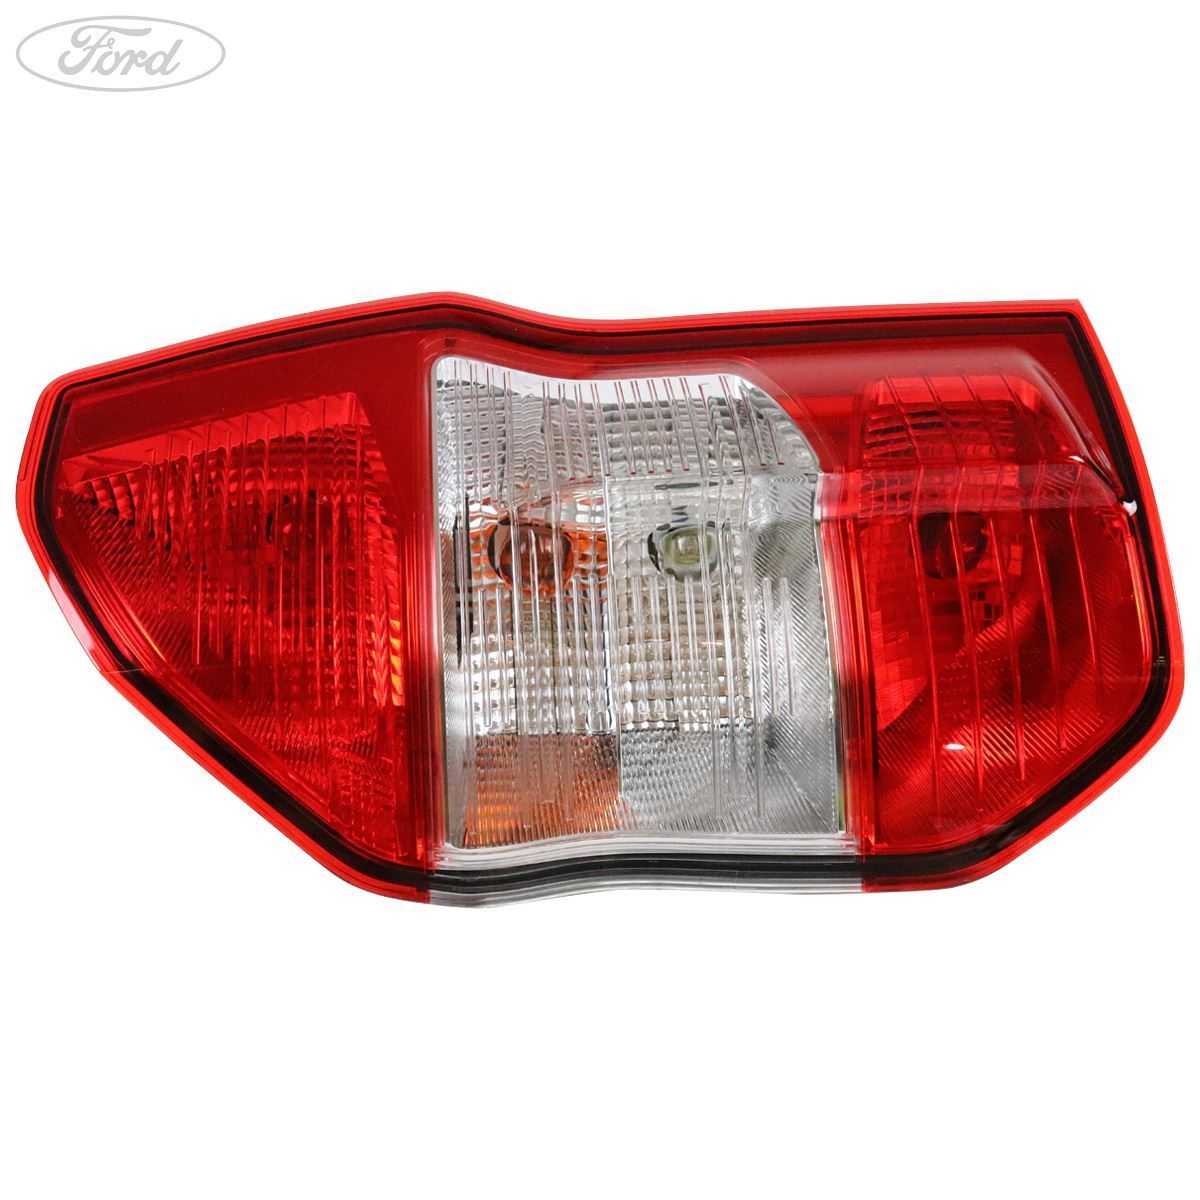 Ford, TRANSIT TOURNEO COURIER REAR DRIVER SIDE LIGHT LAMP UNIT 2014-